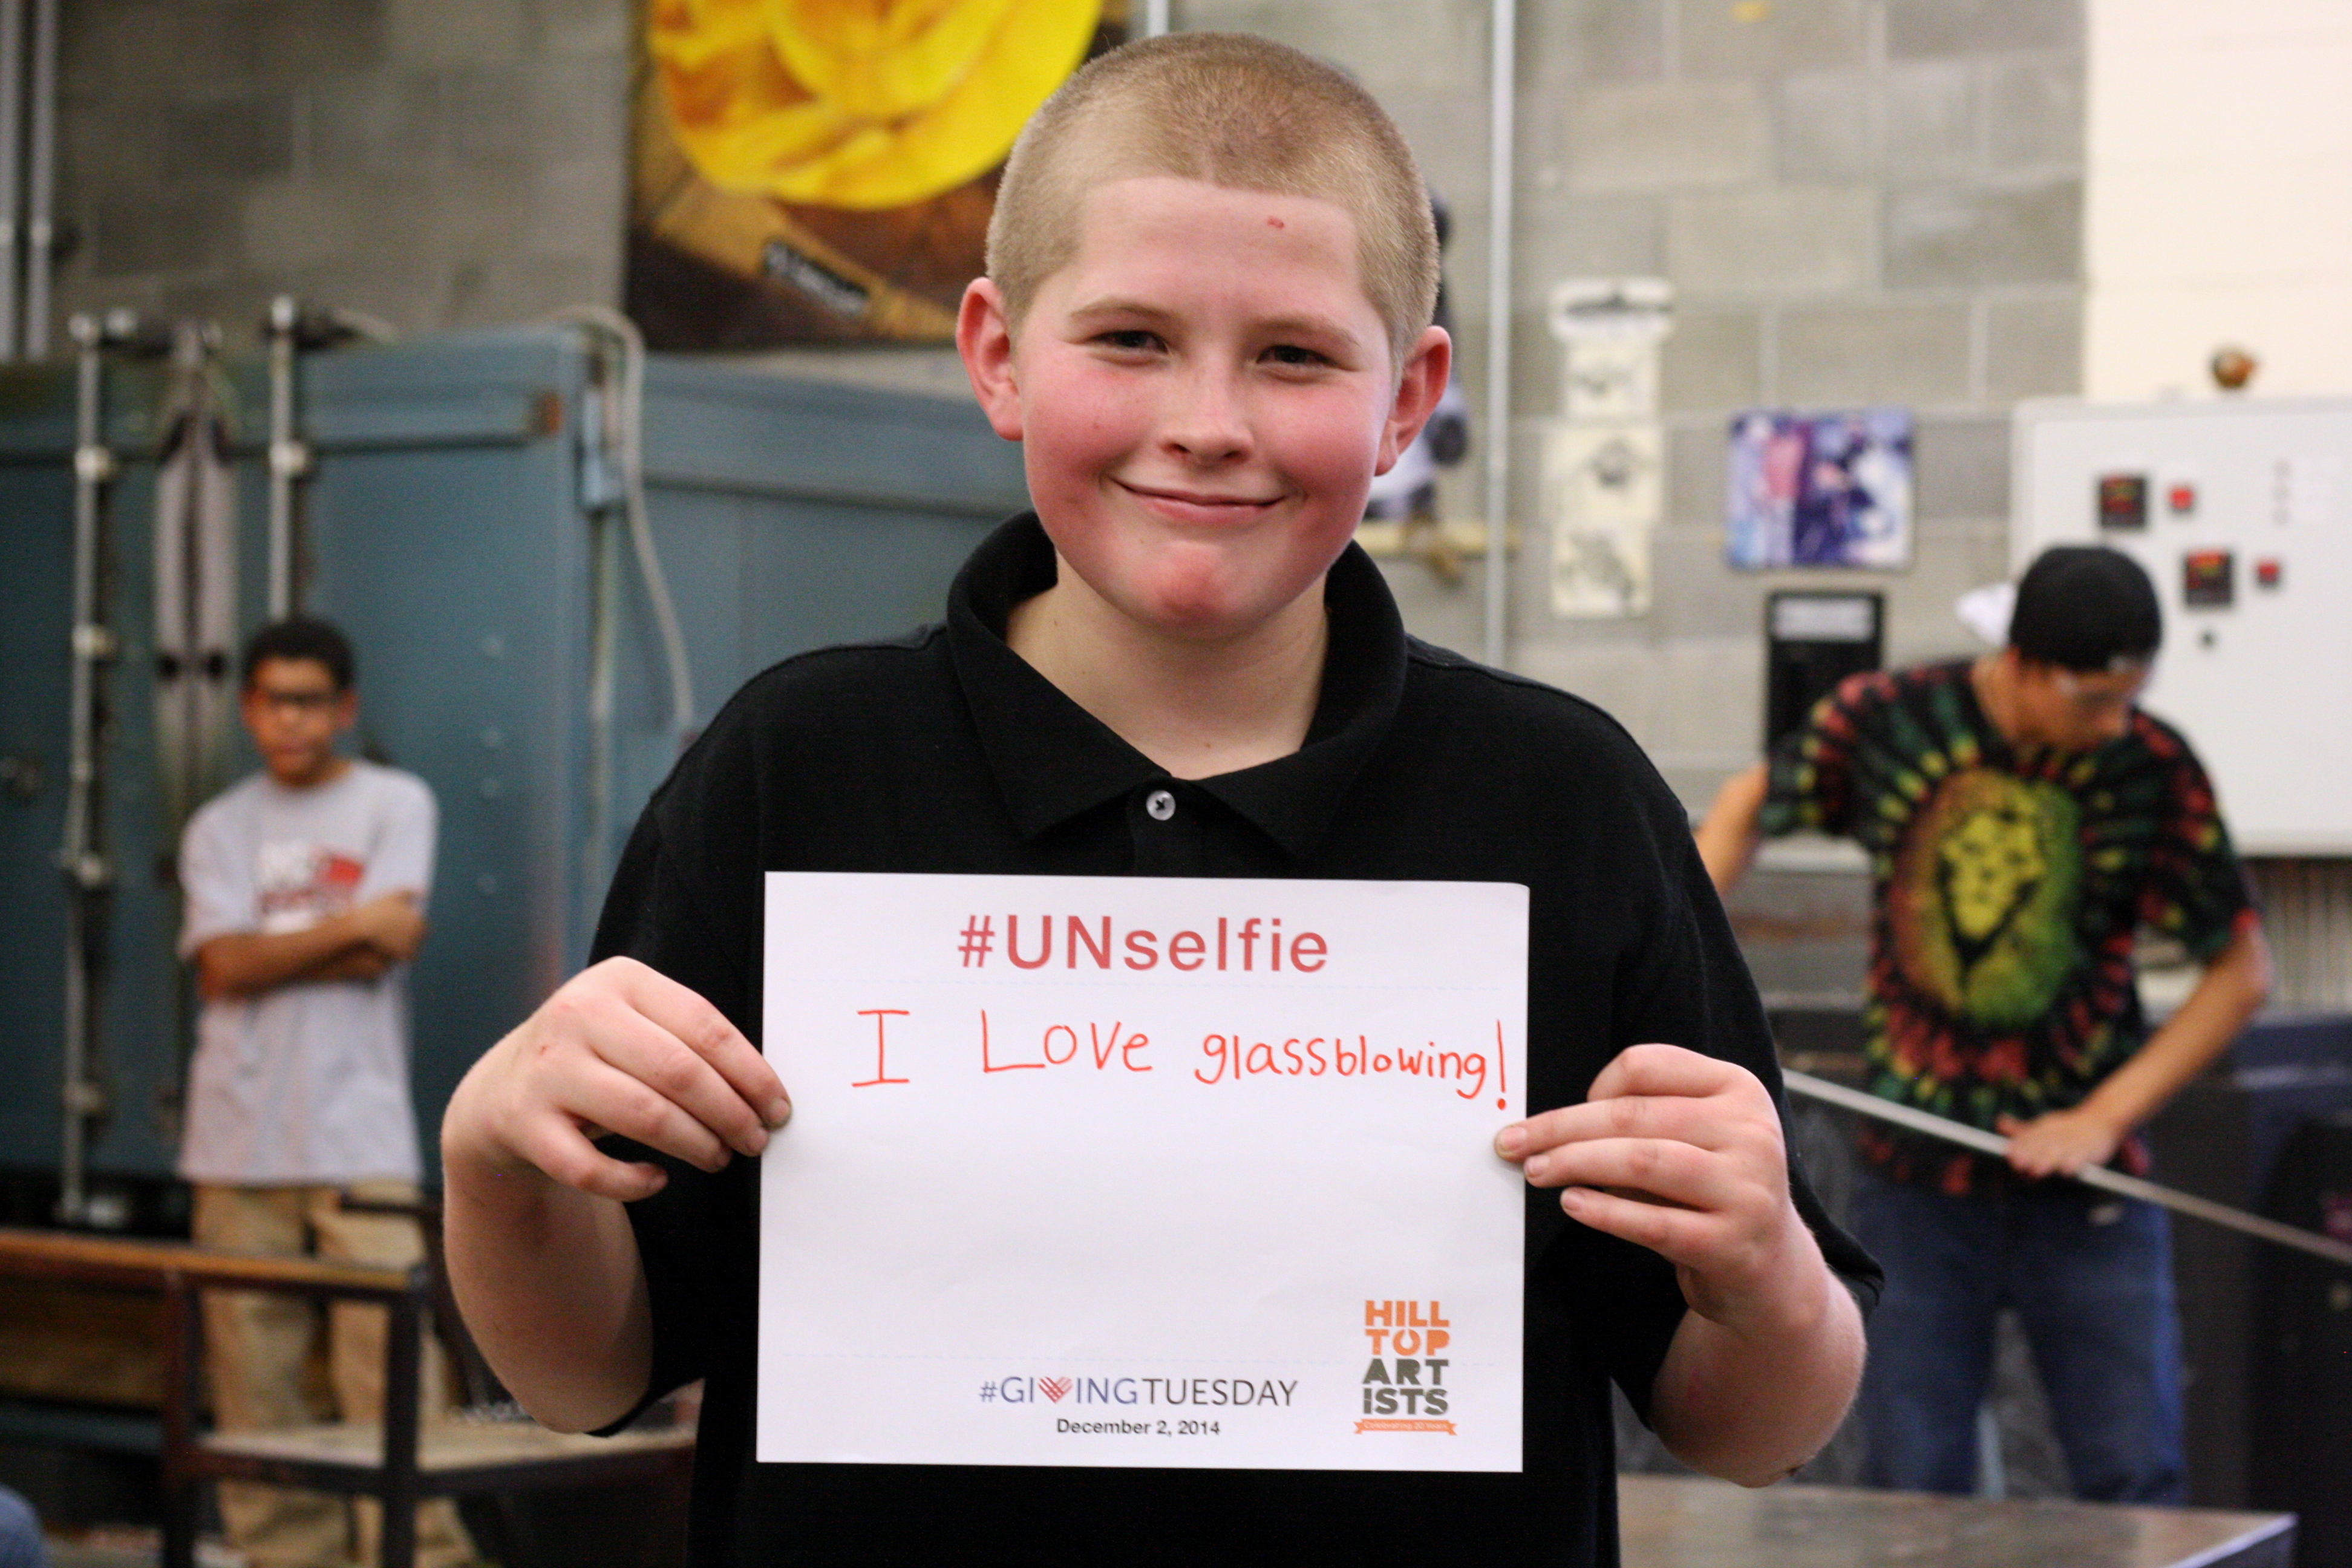 #Unselfie For Giving Tuesday